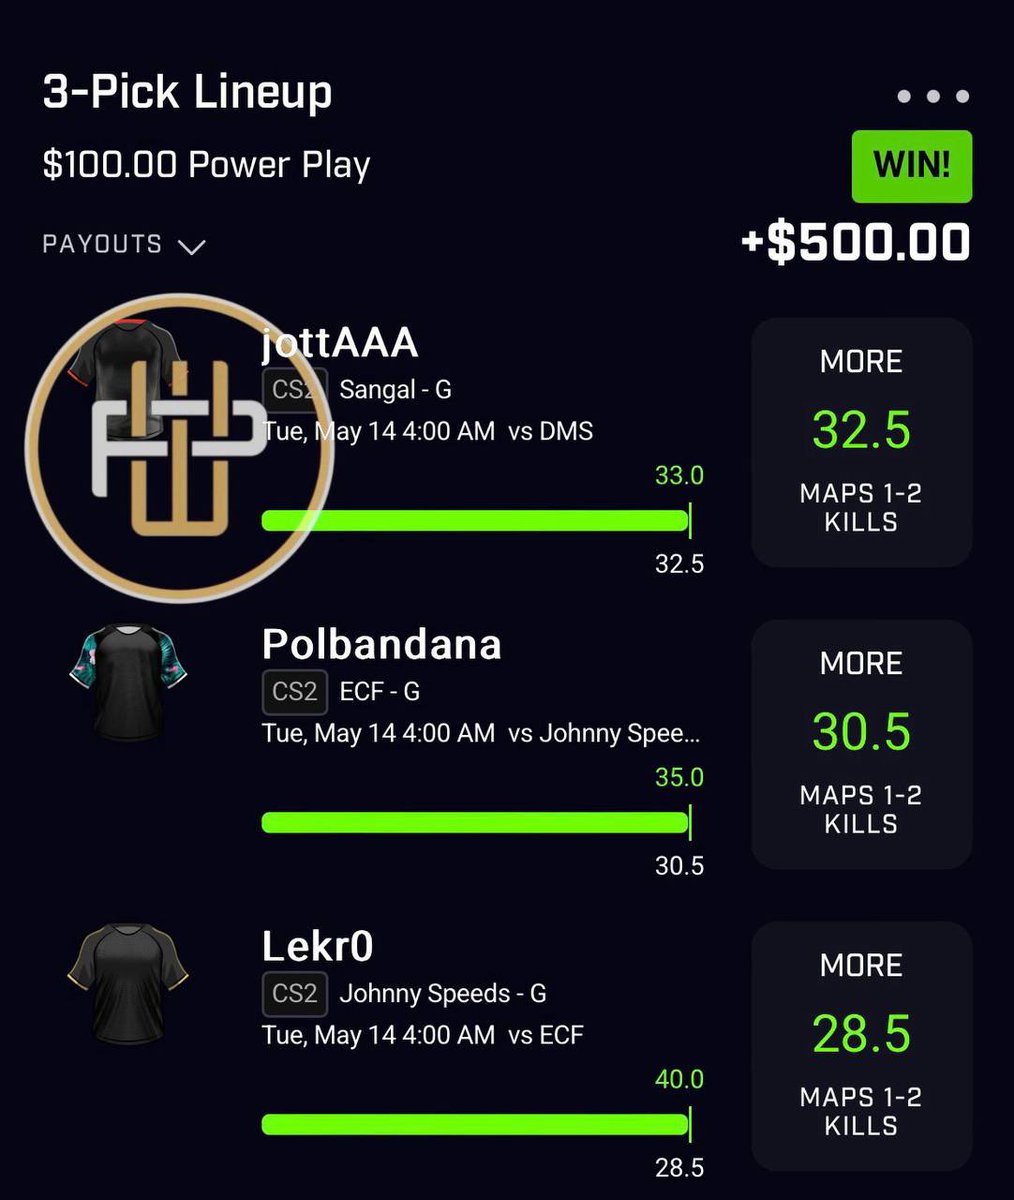 ⭐️𝐂𝐀𝐒𝐇 𝐈𝐓🧪🤑☢️NUKED☢️
🤩 This is Why You Need Notifications On🔥🔥🔥🔥
💰Follow  & LIKE this up
FREE DISCORD⬇️
 t.me/+AvLeUGD4l69lY…

#PrizePicks | #PrizePicksNBA #NBA       #NBATwitter #prizepicksmlb #PrizePicks #freeplays #potd #nukes #bettingpicks #GambingX